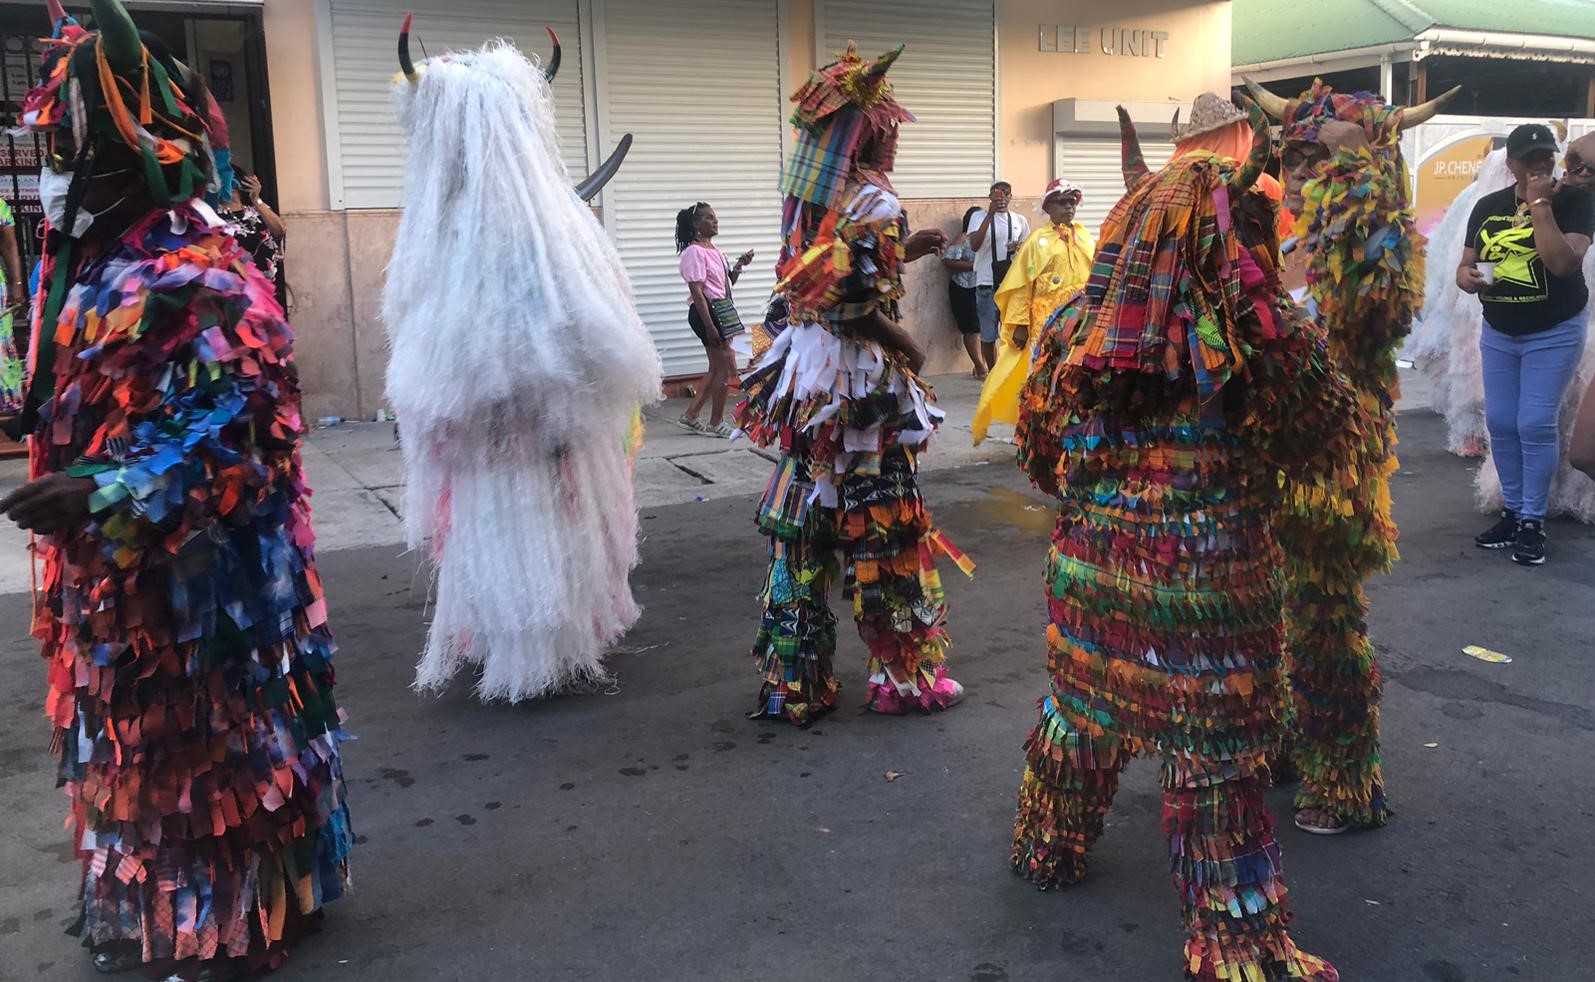 Dominica's Carnival 2023 is Enjoyed by Many - Dominica Update